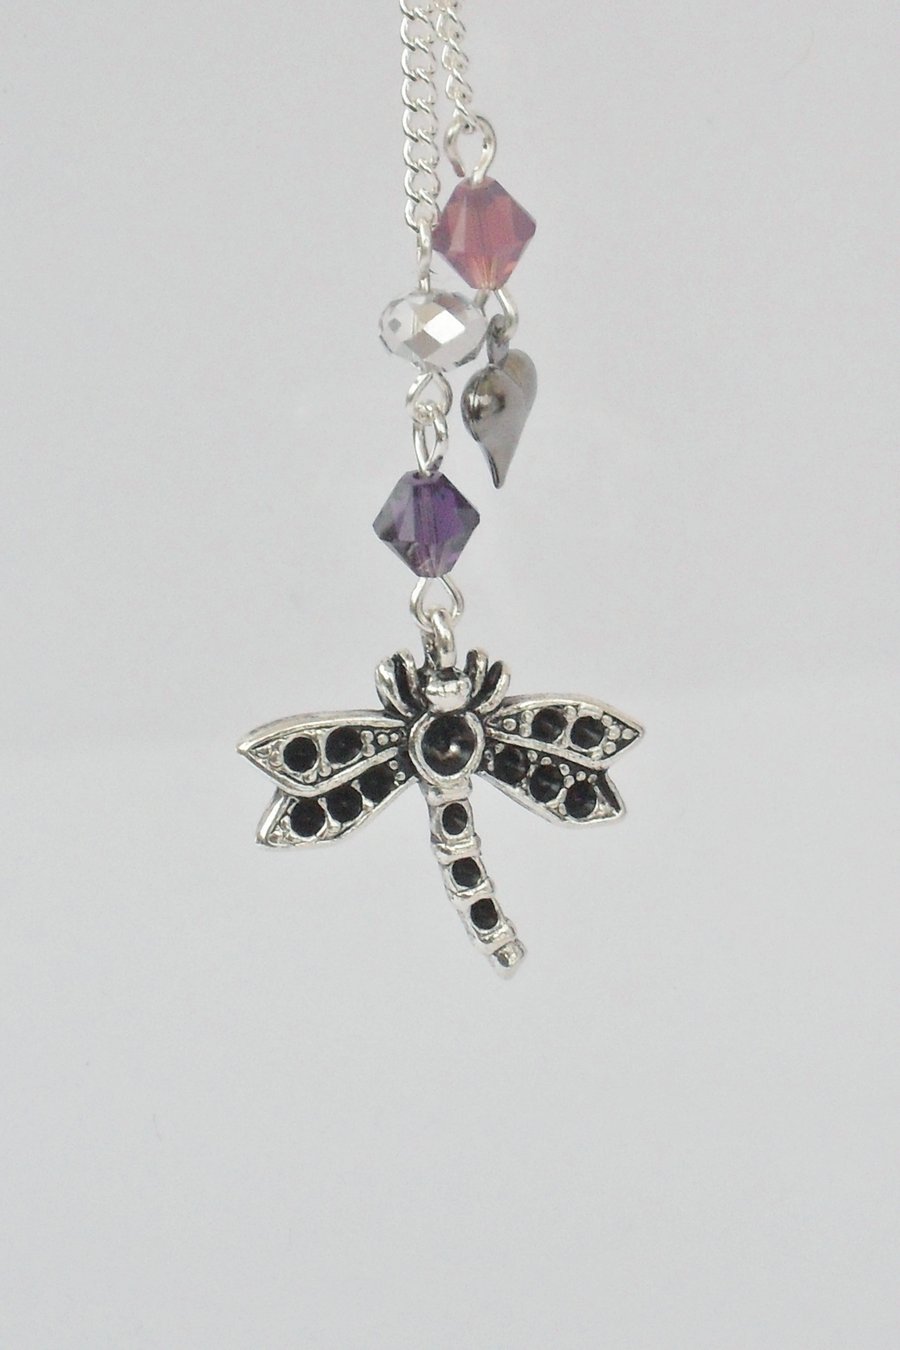 Dragonfly and heart charm necklace, with purple swarovski crystal